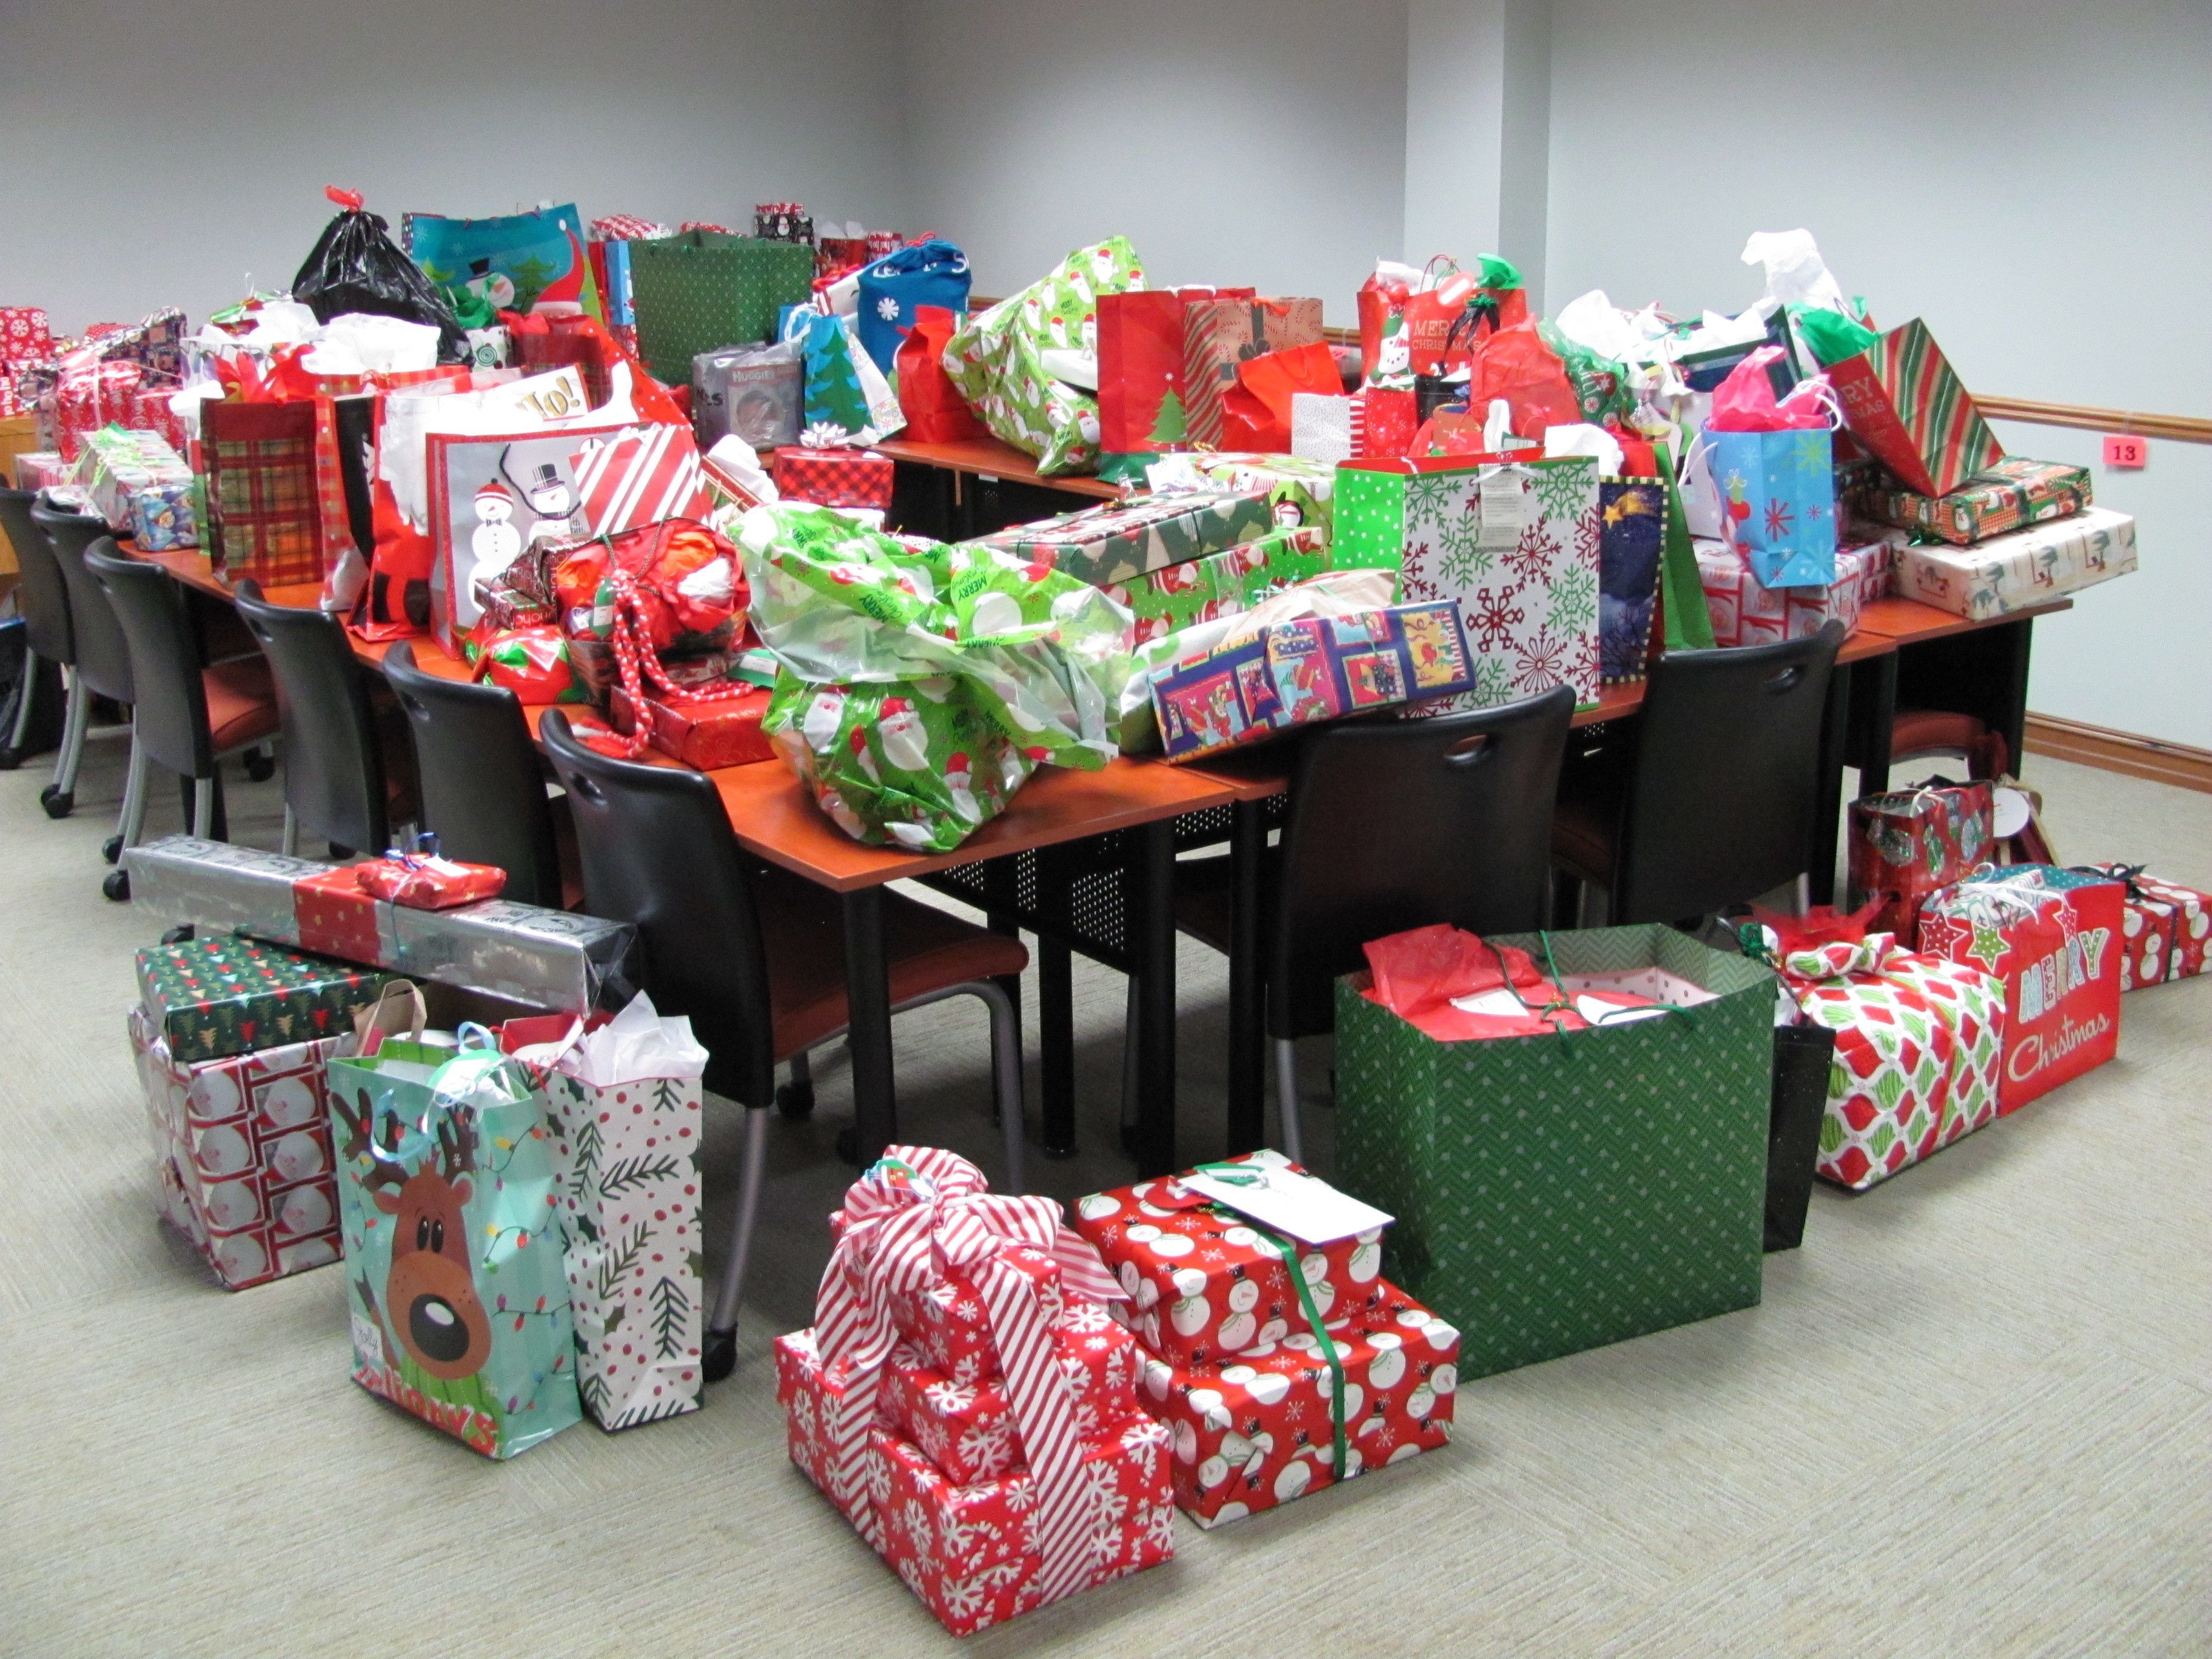 Assisting Our Families Is Part of Dayton Habitat’s Christmas Tradition